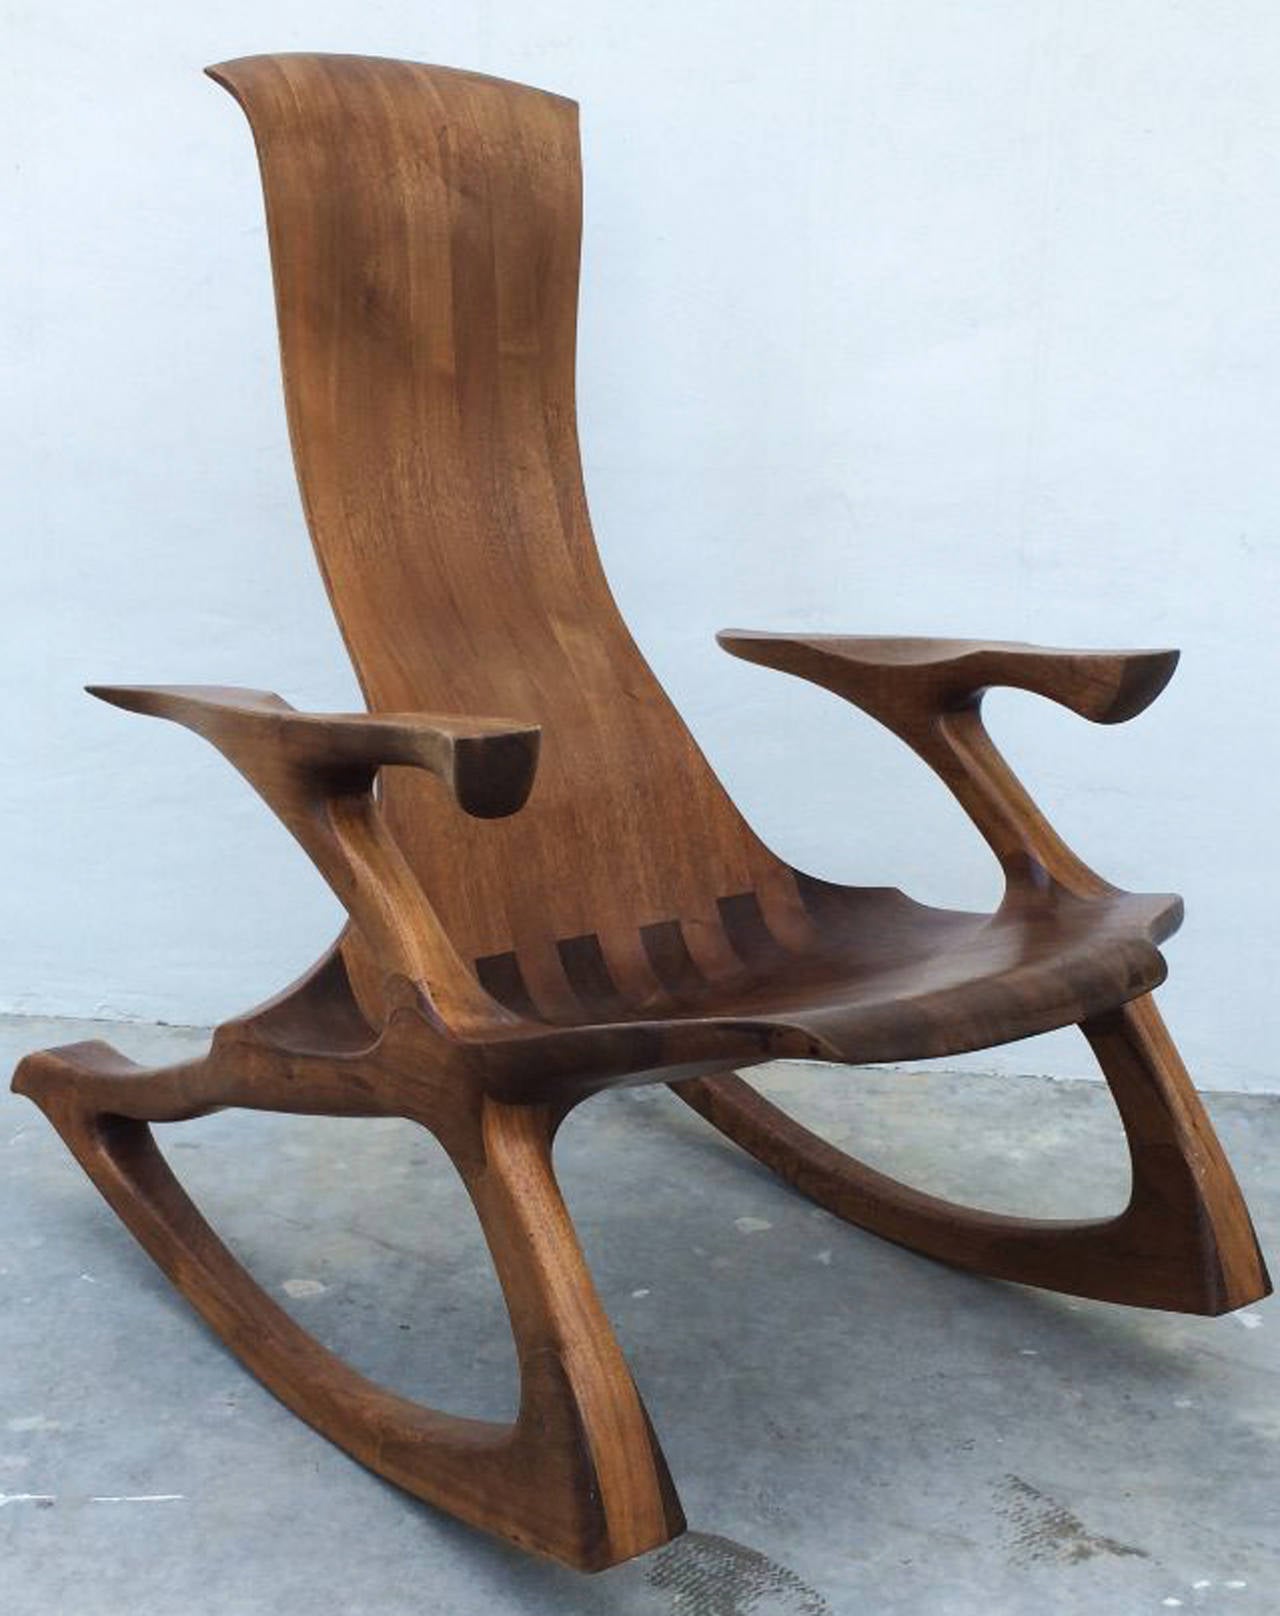 A fine handcrafted and sculpted rocking chair, late 20th century. Laminated and sculpted walnut staved wood item retains original finish. Impressive design and execution. 36.5